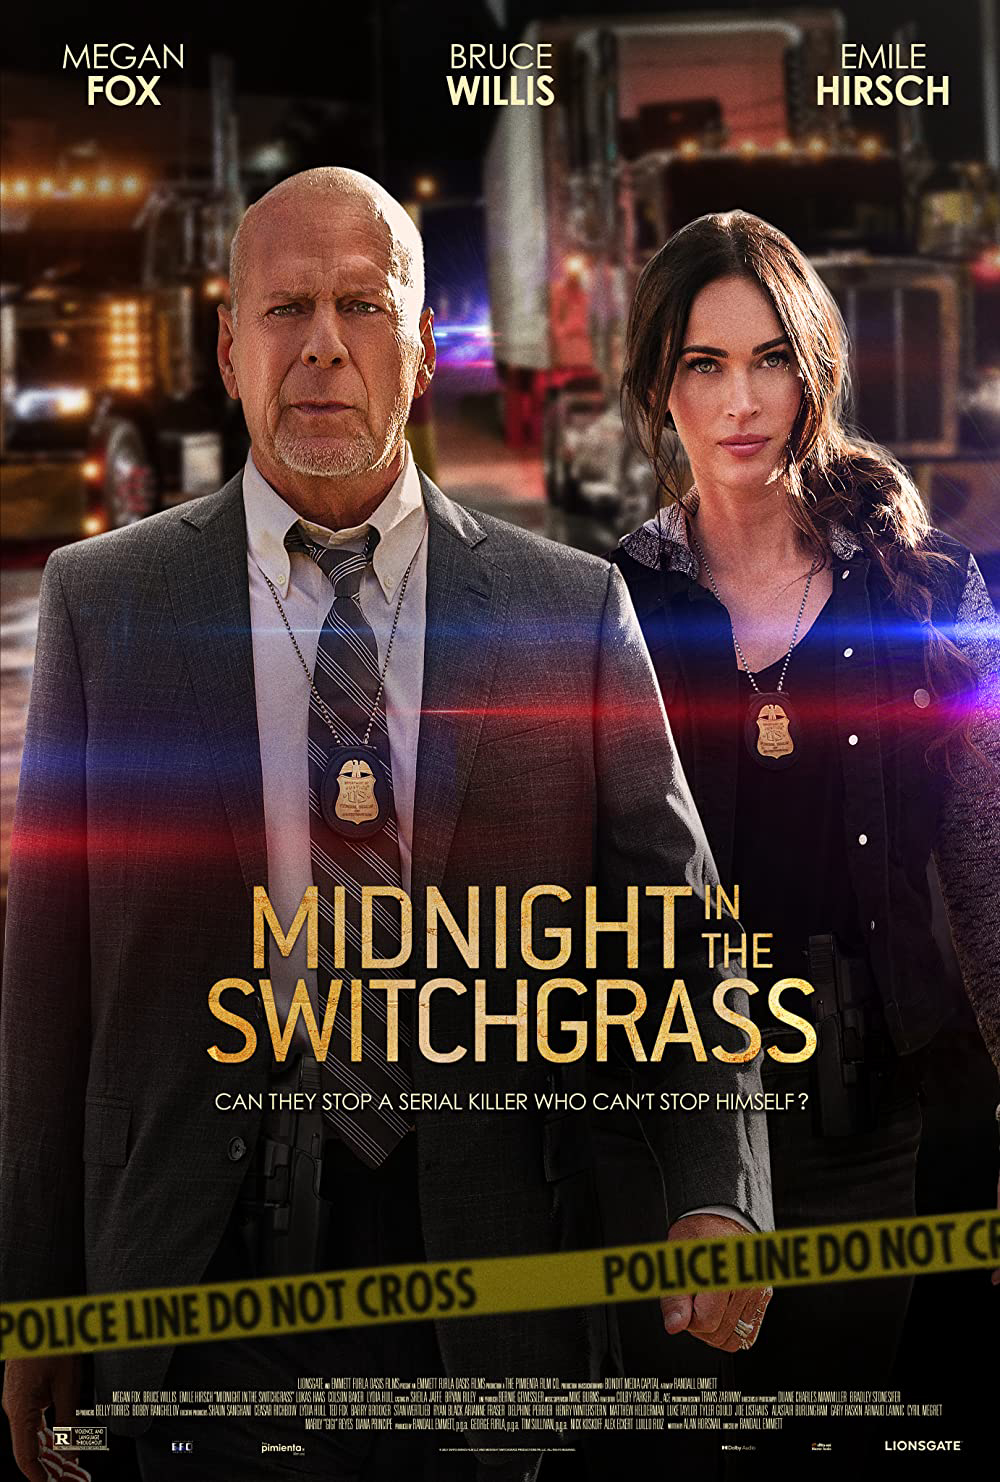 Poster Phim Nửa Đêm Trong Bụi Cỏ (Midnight in the Switchgrass)